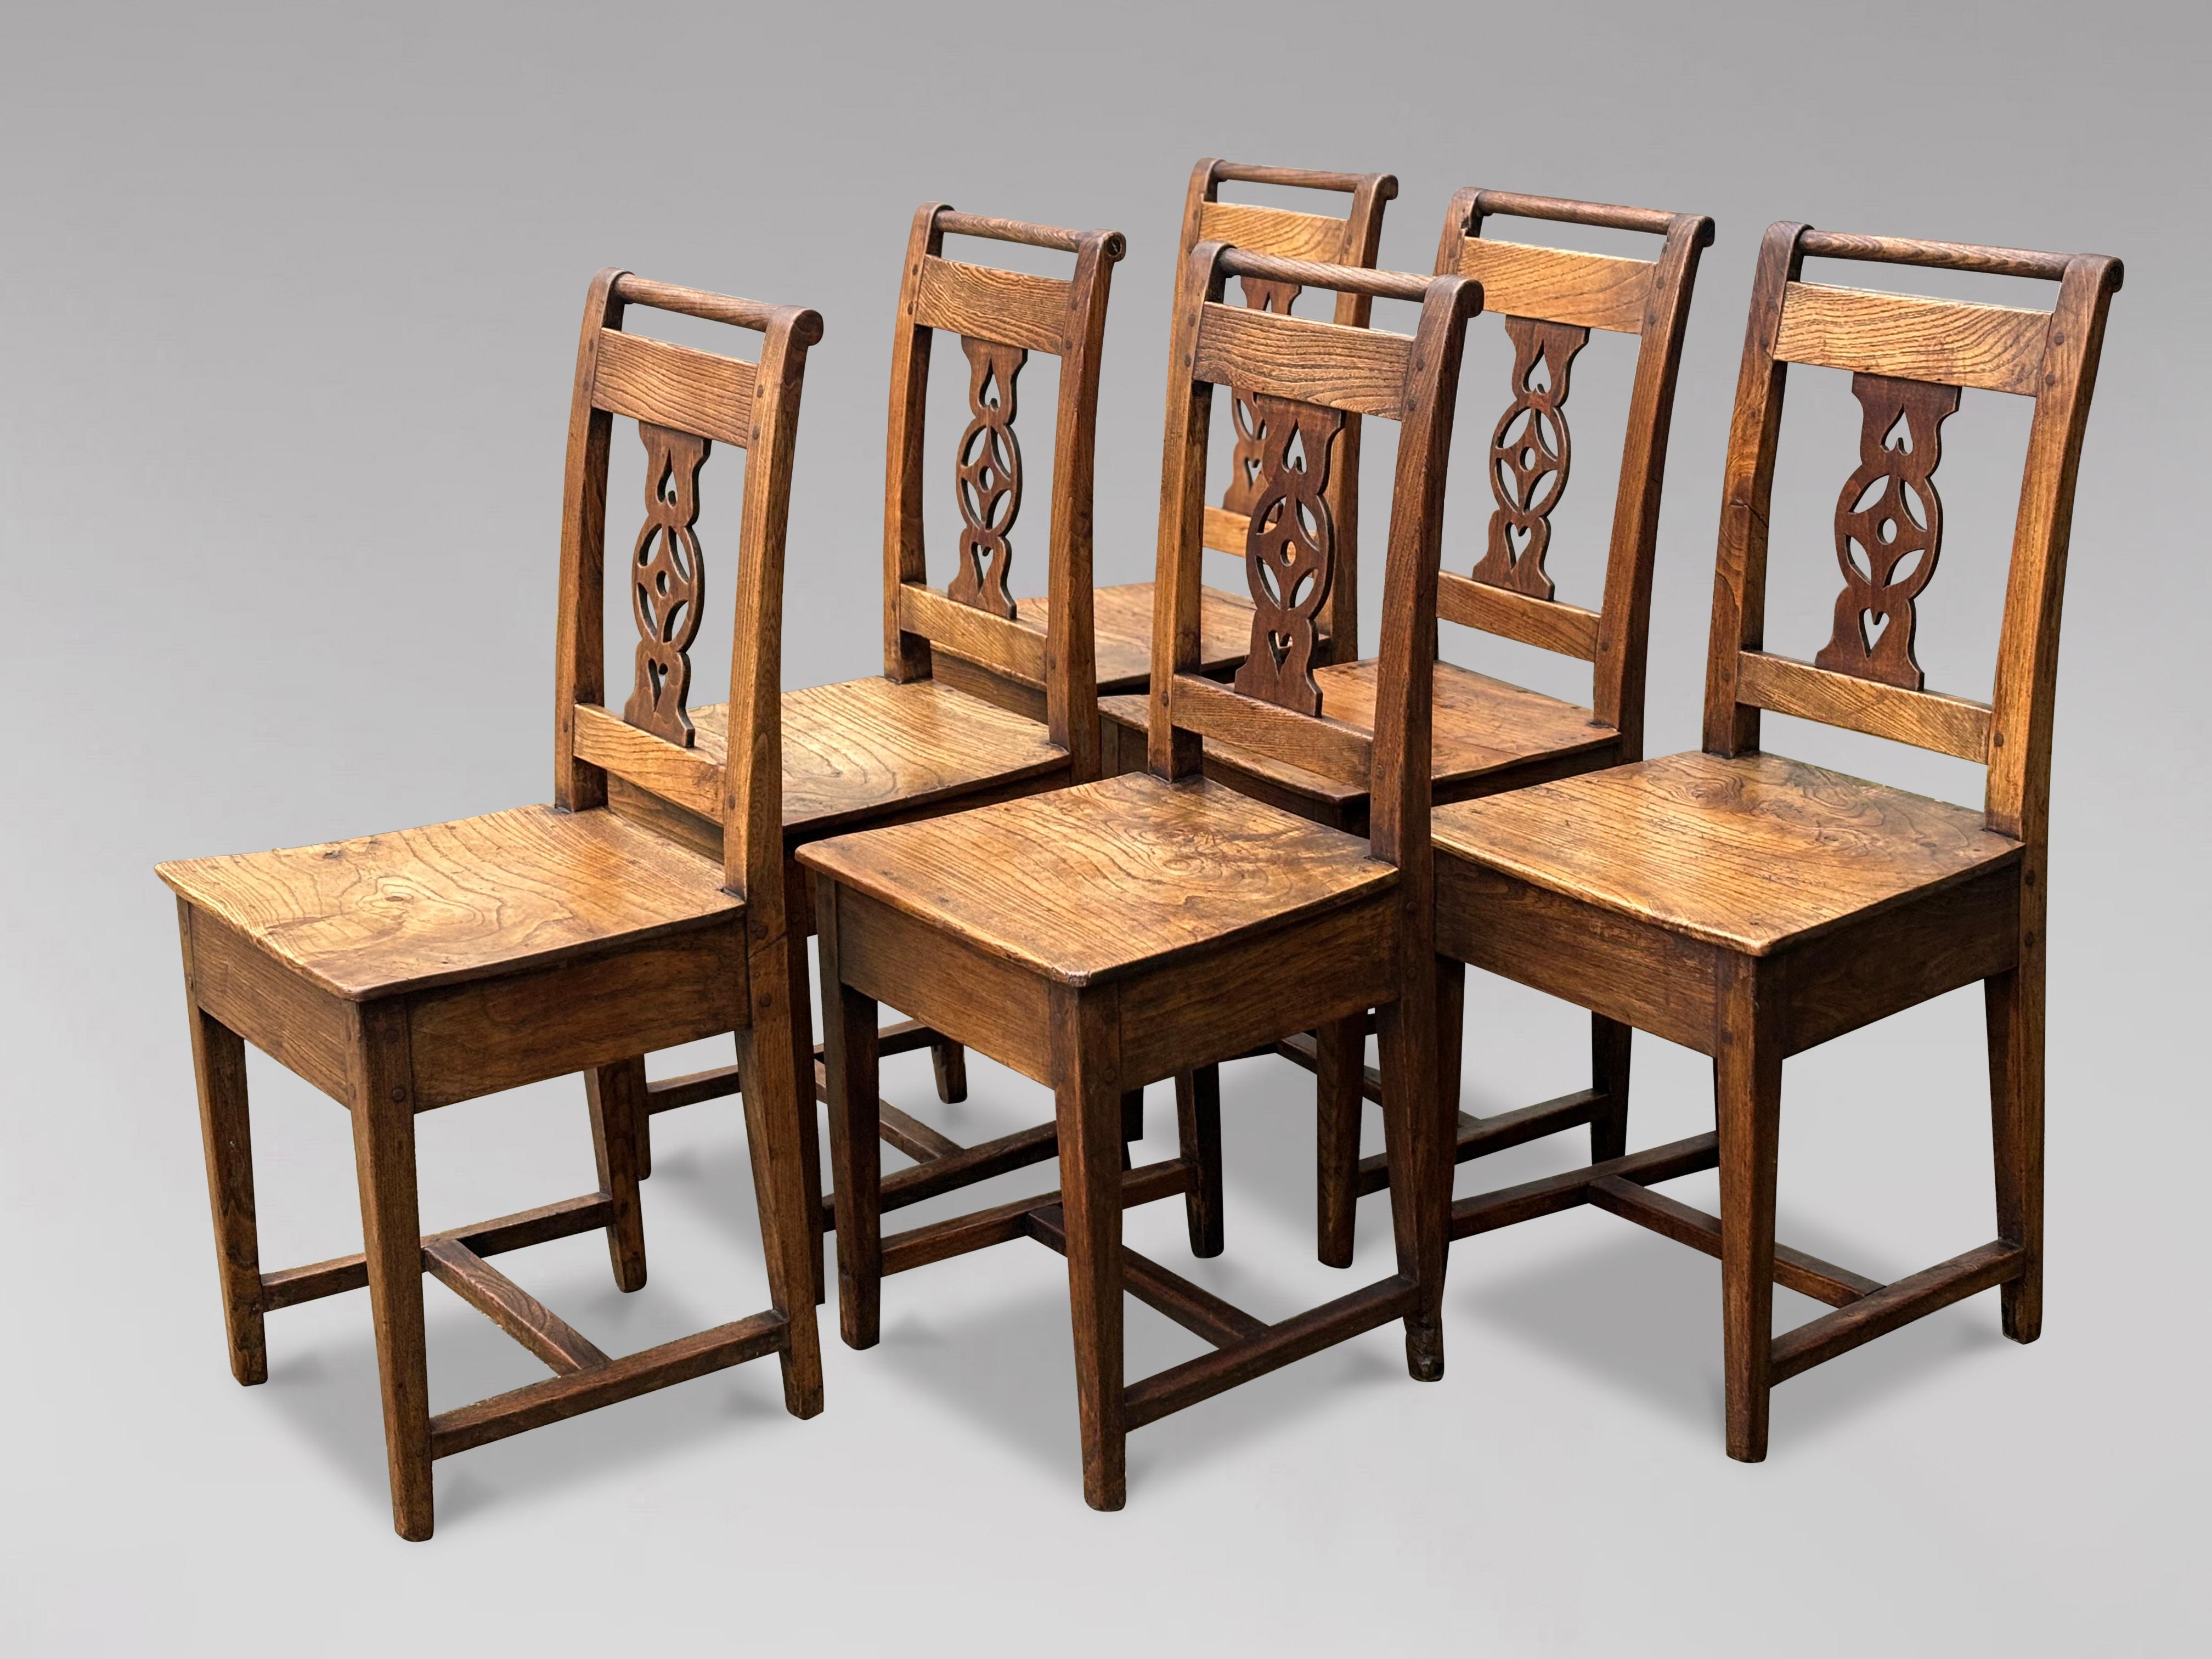 Georgian Early 19th Century Set of 6 Yew Wood Farmhouse Kitchen Dining Chairs